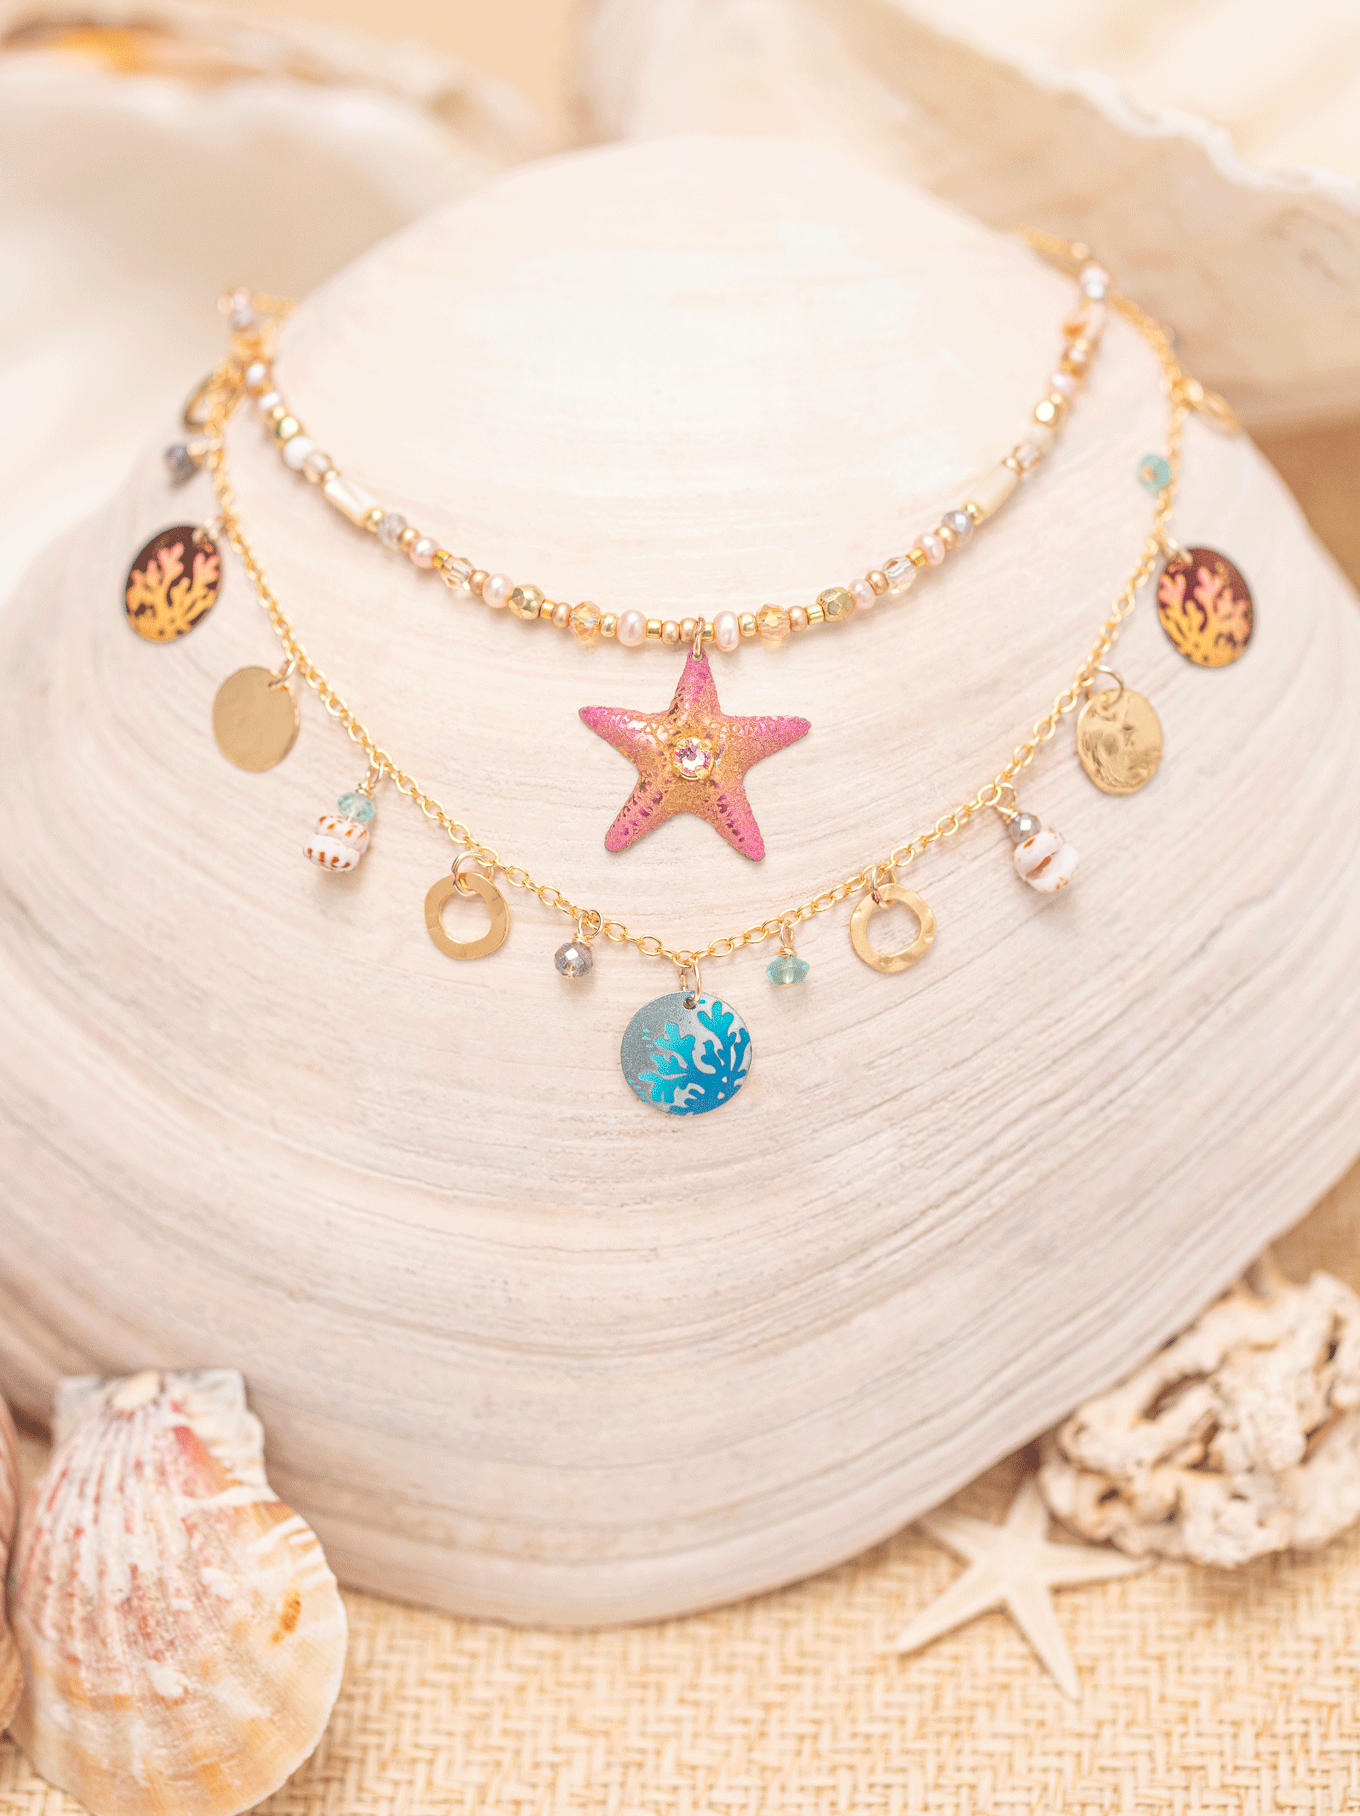 The Coral Reef Necklace offers treasures you'll find beneath the ...